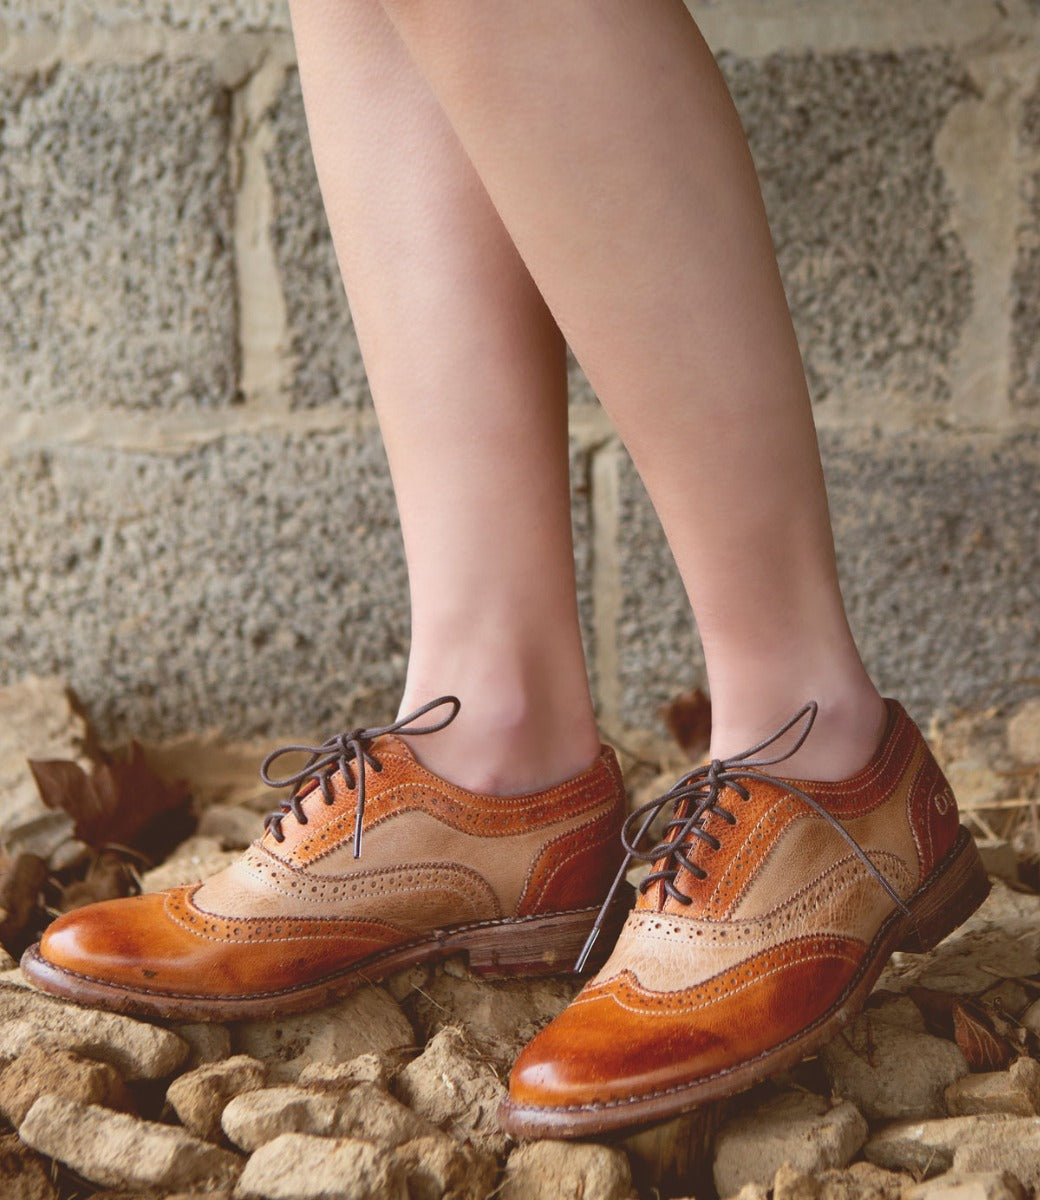 A woman wearing a pair of brown and tan Bed Stu Lita oxford shoes.